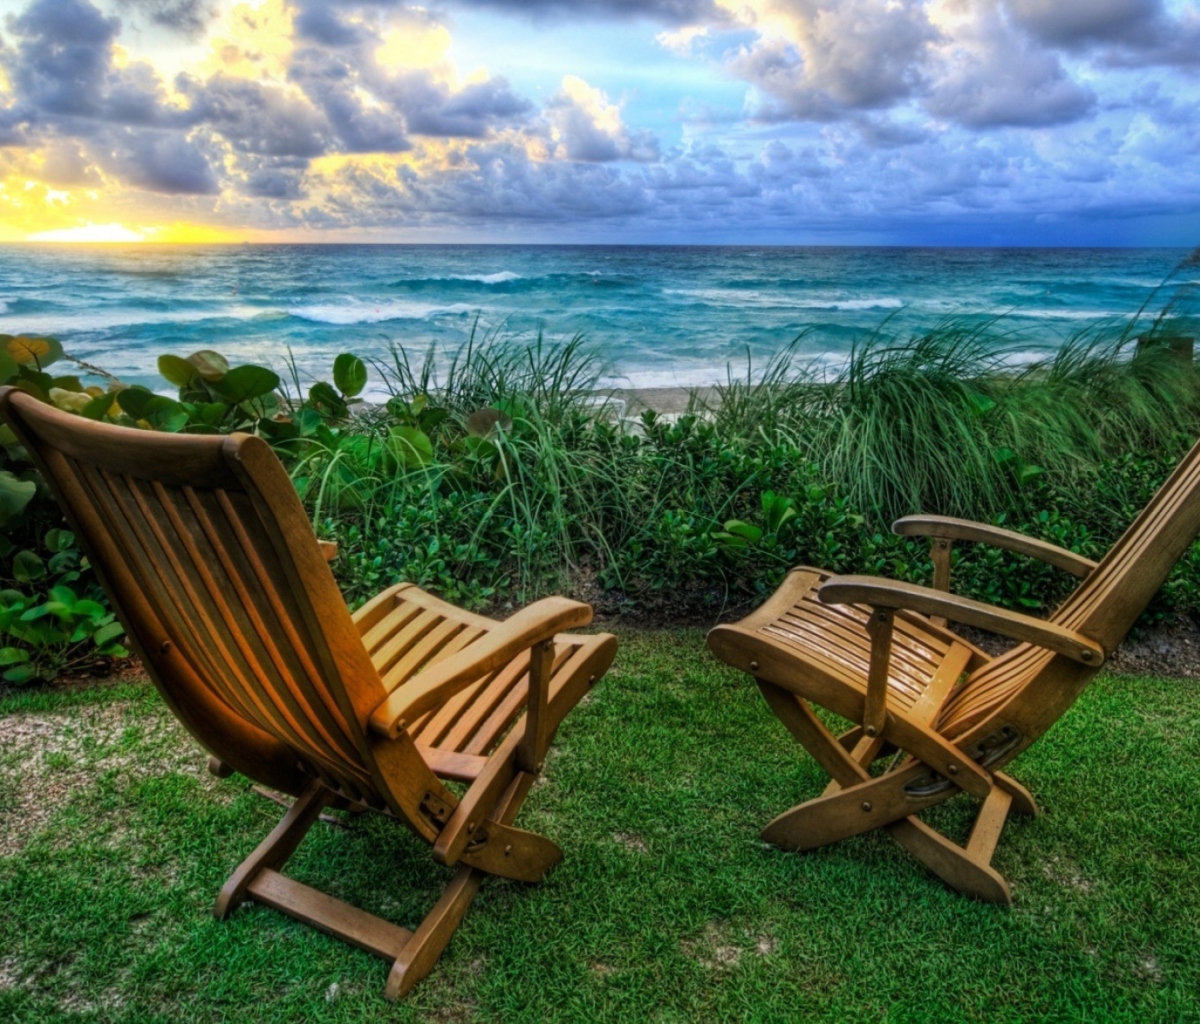 Chairs With Sea View wallpaper 1200x1024